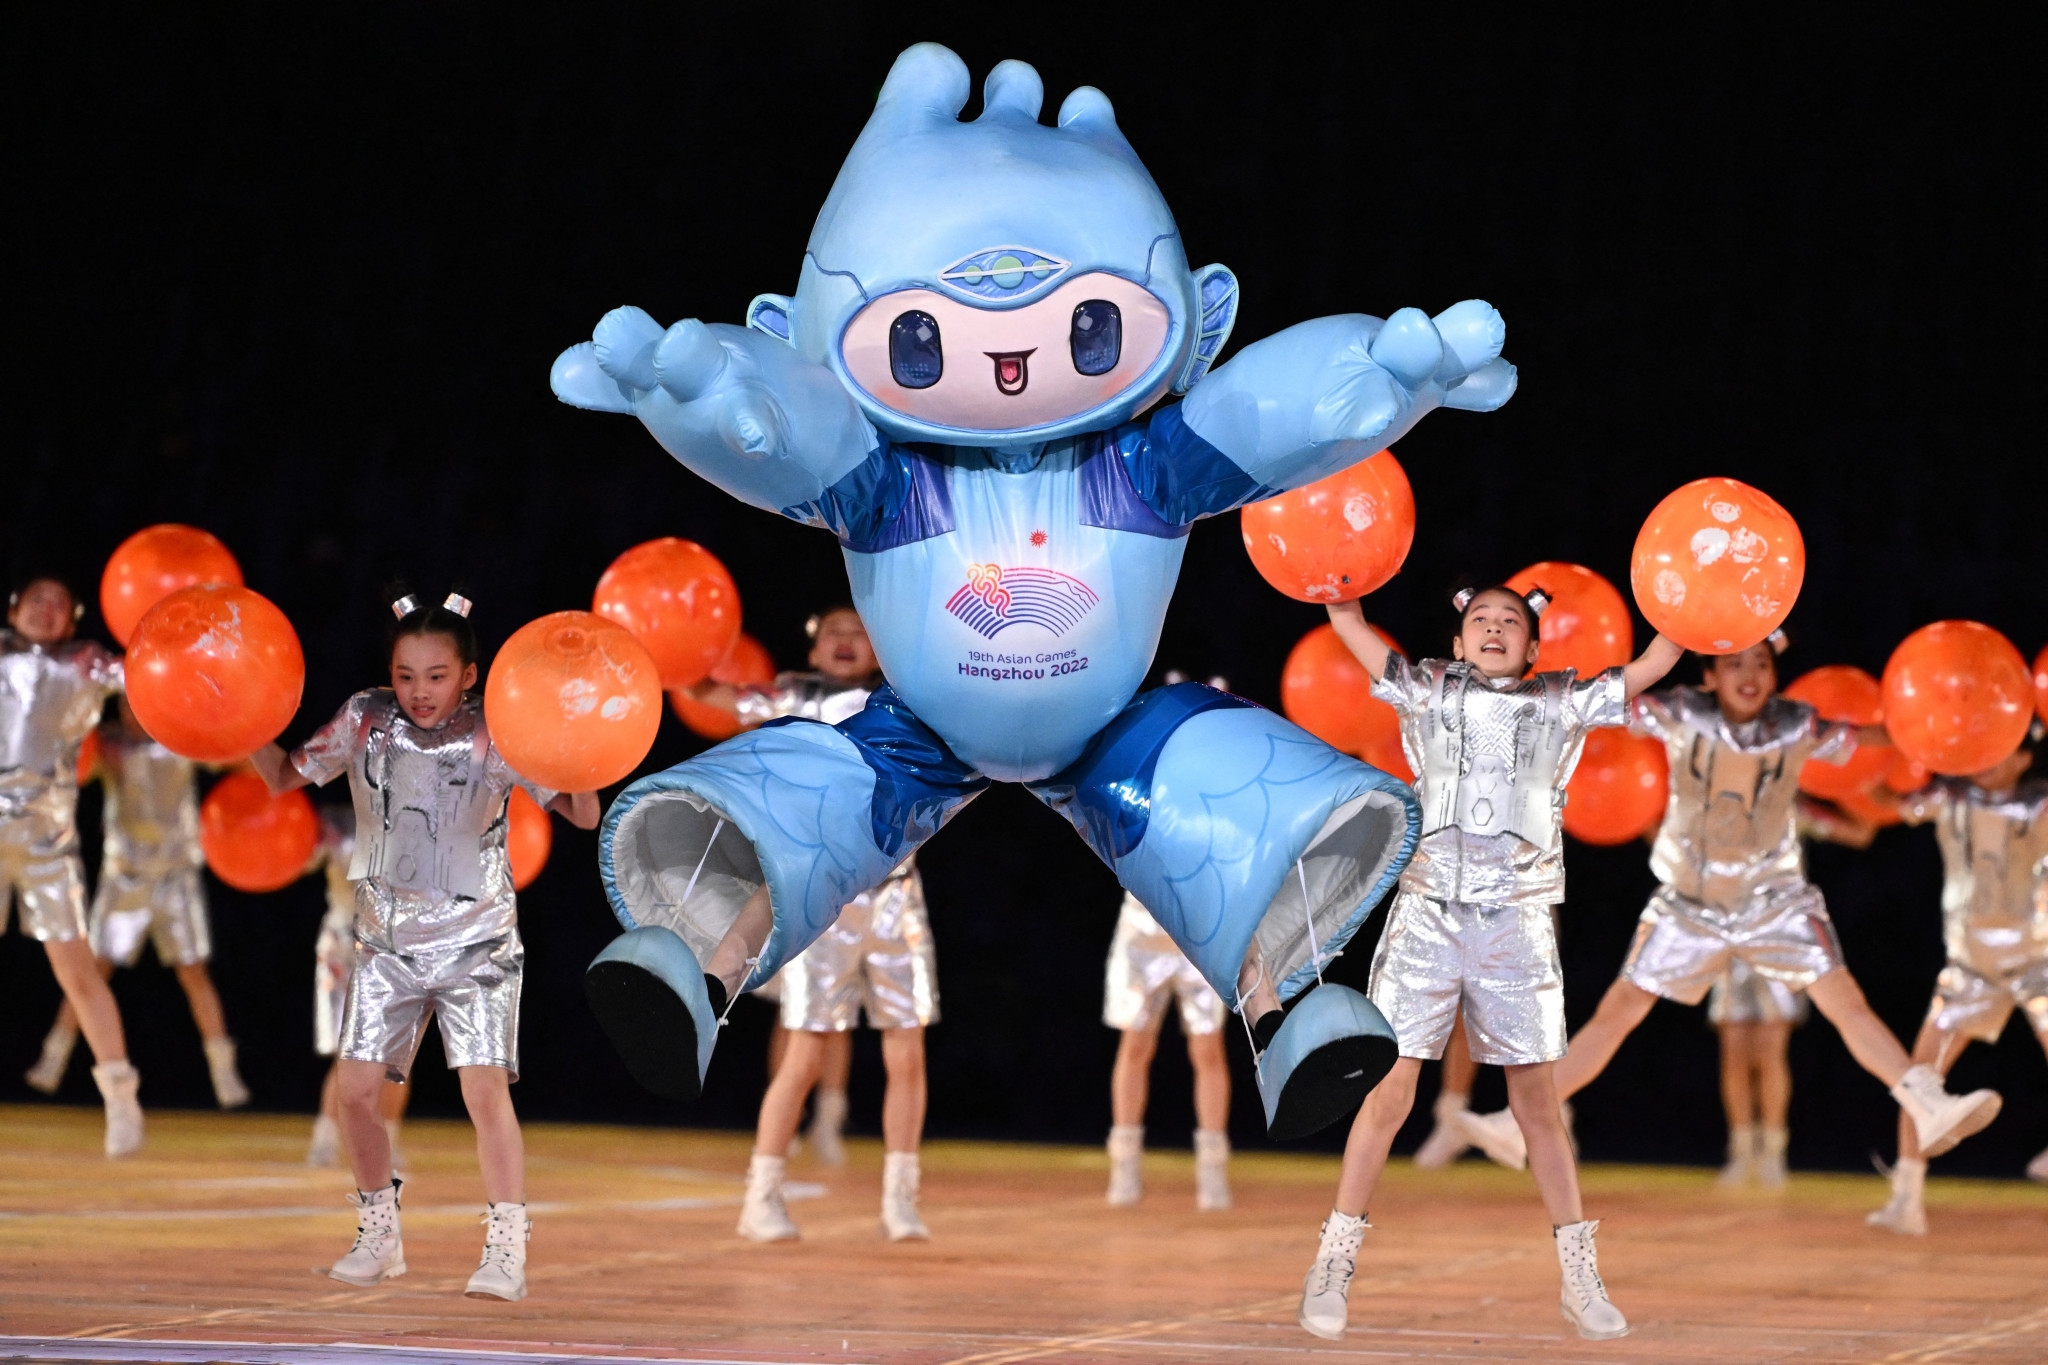 The Hangzhou 2022 mascot played a prominent role in the fun-filled show ©Getty Images